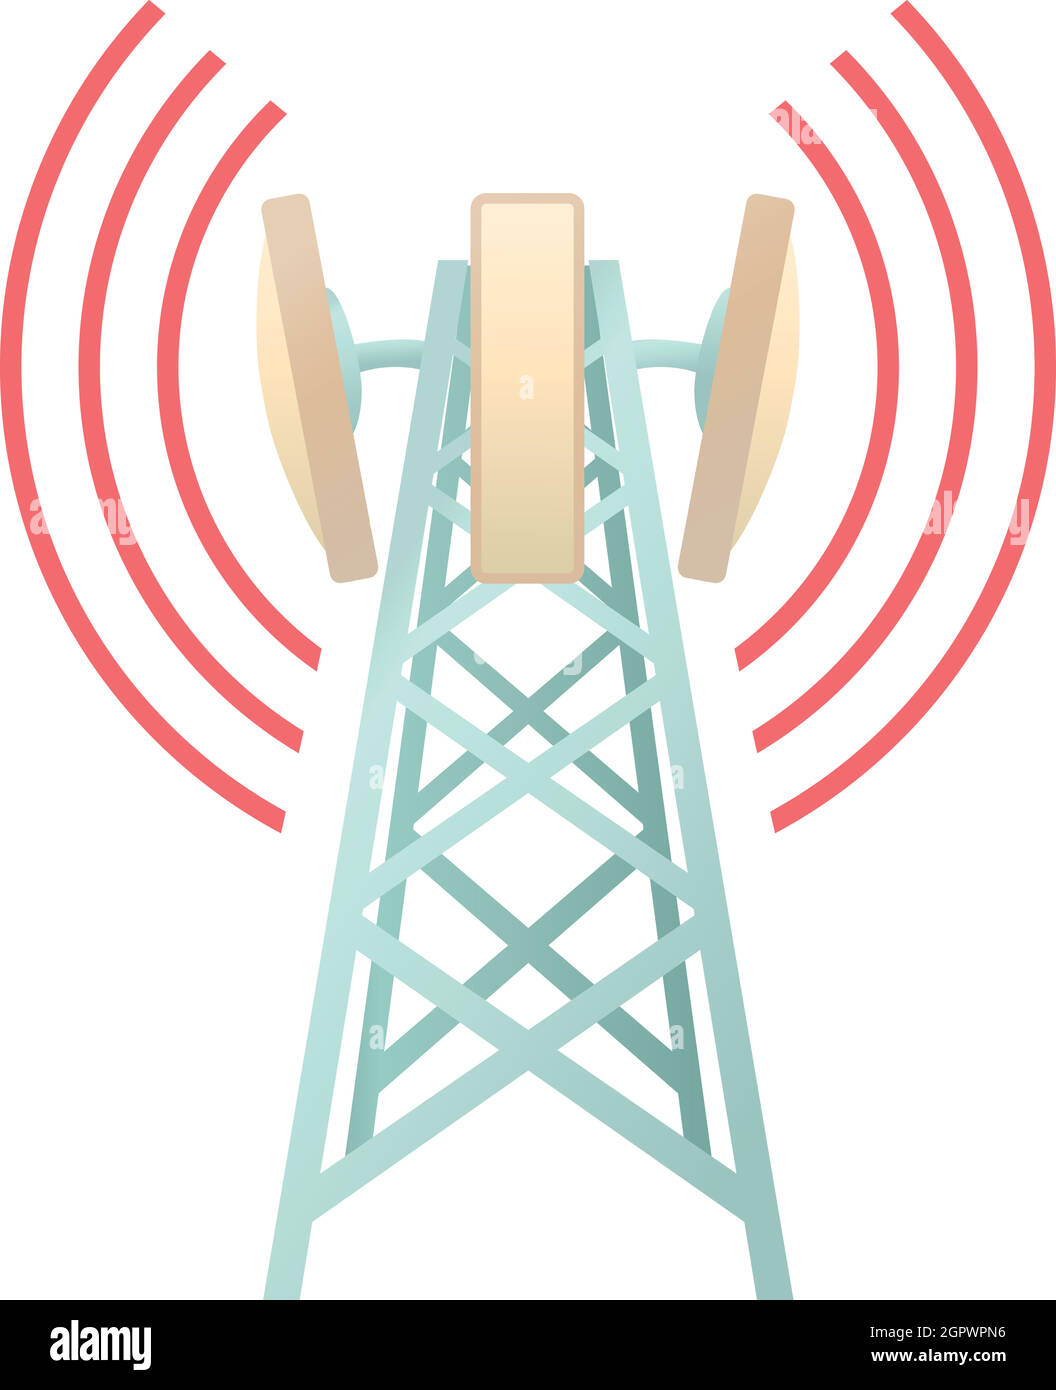 Tower with telecommunications equipment icon Stock Vector